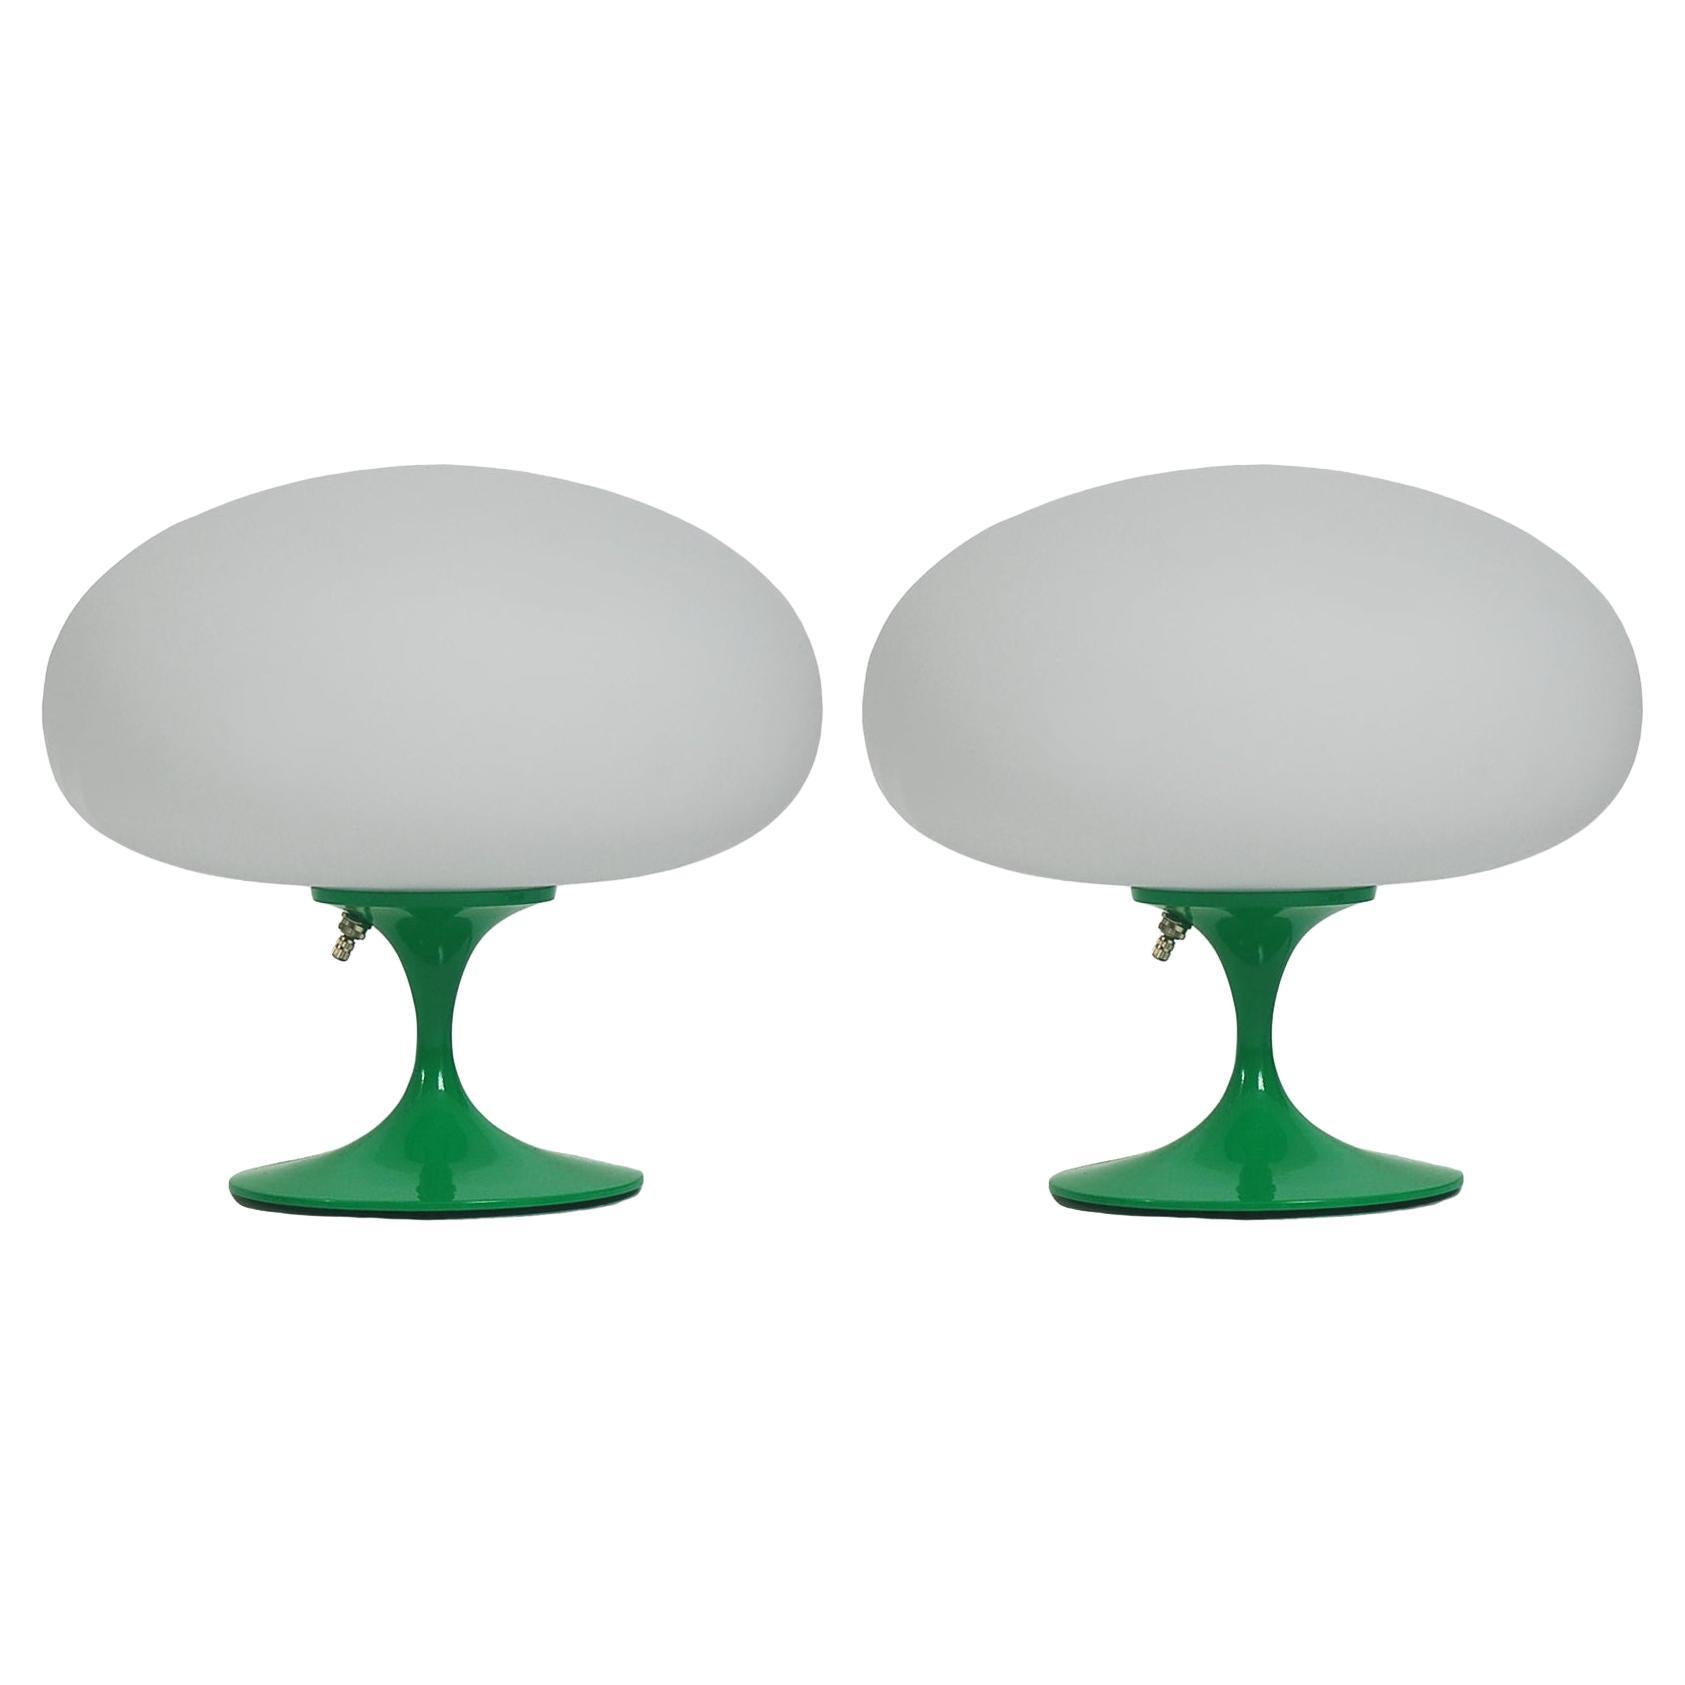 Pair of Mid-Century Tulip Table Lamps by Designline in Green with White Glass